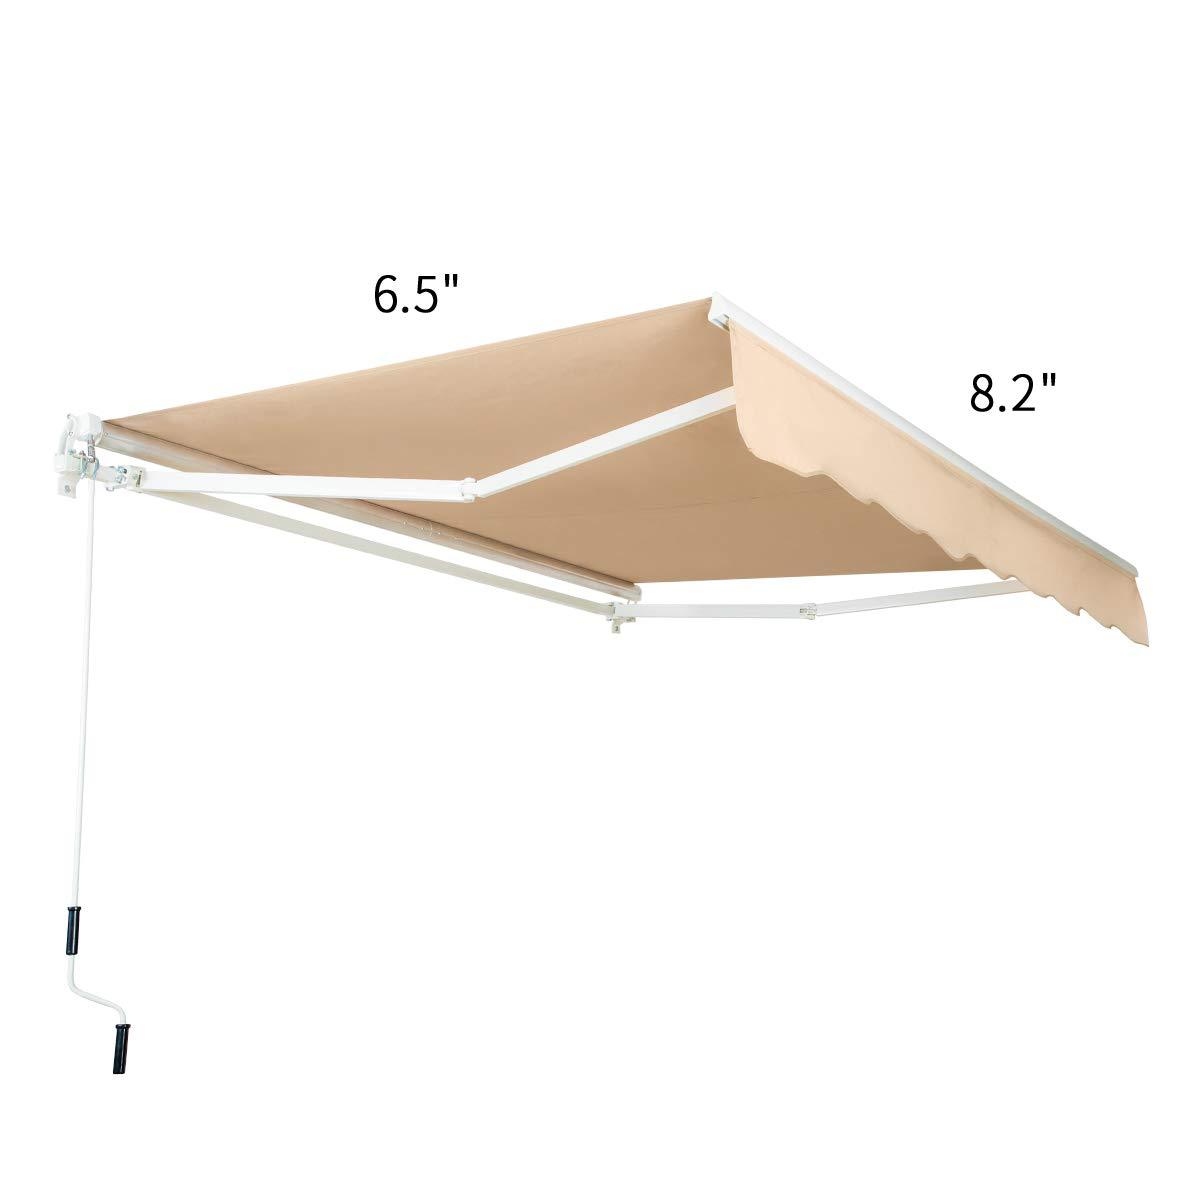 8.2'x6.5' Patio Awning Retractable Sunshade with Manual Crank Handle, Beige